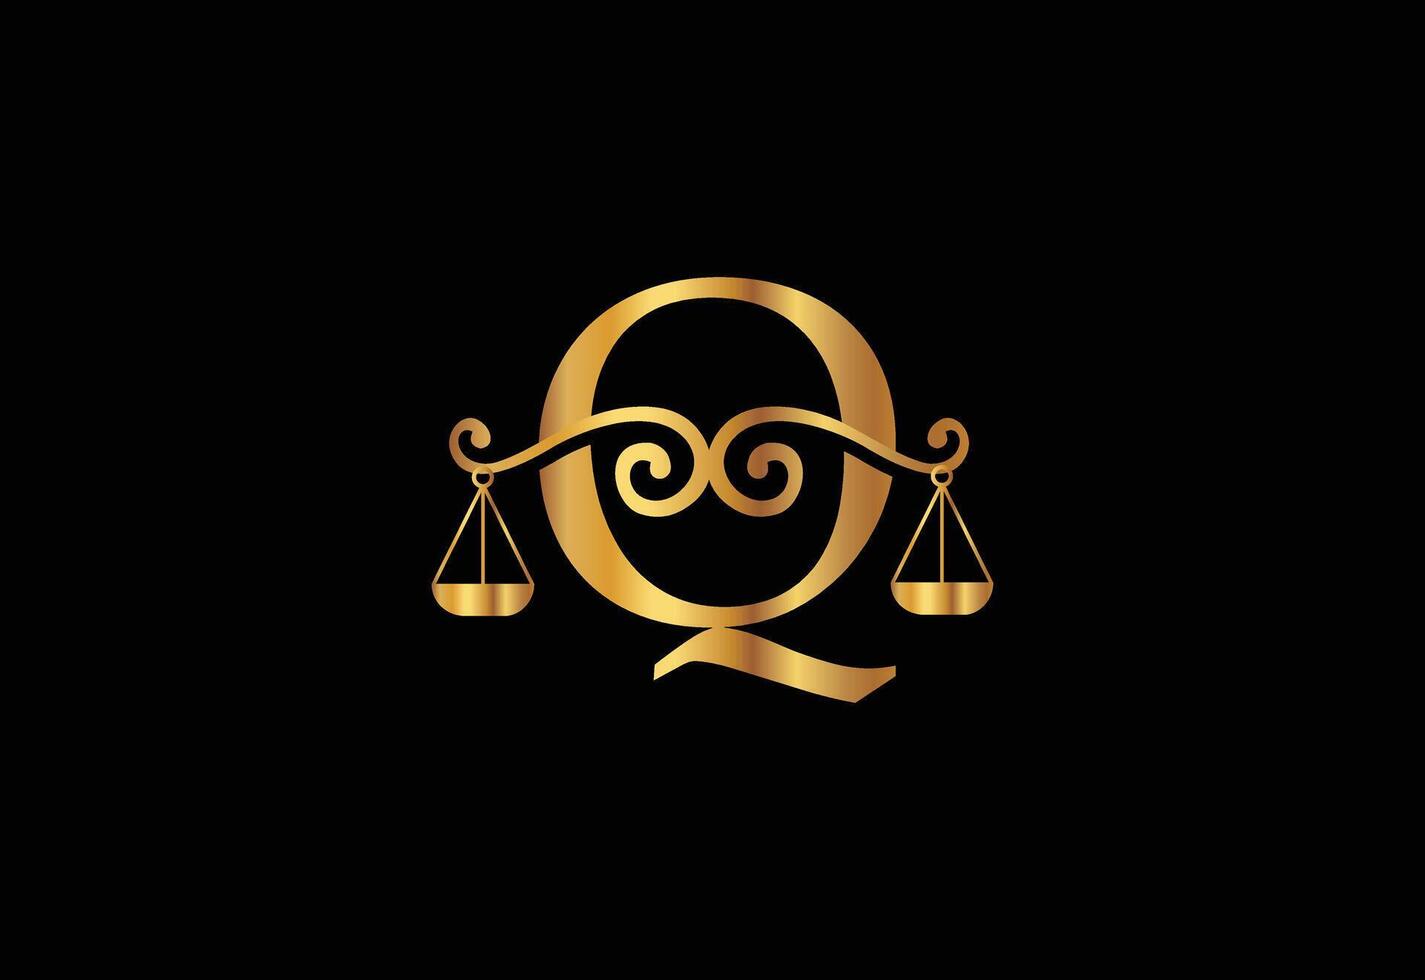 Low firm logo with latter Q vector template, Justice logo, Equality, judgement logo vector illustration